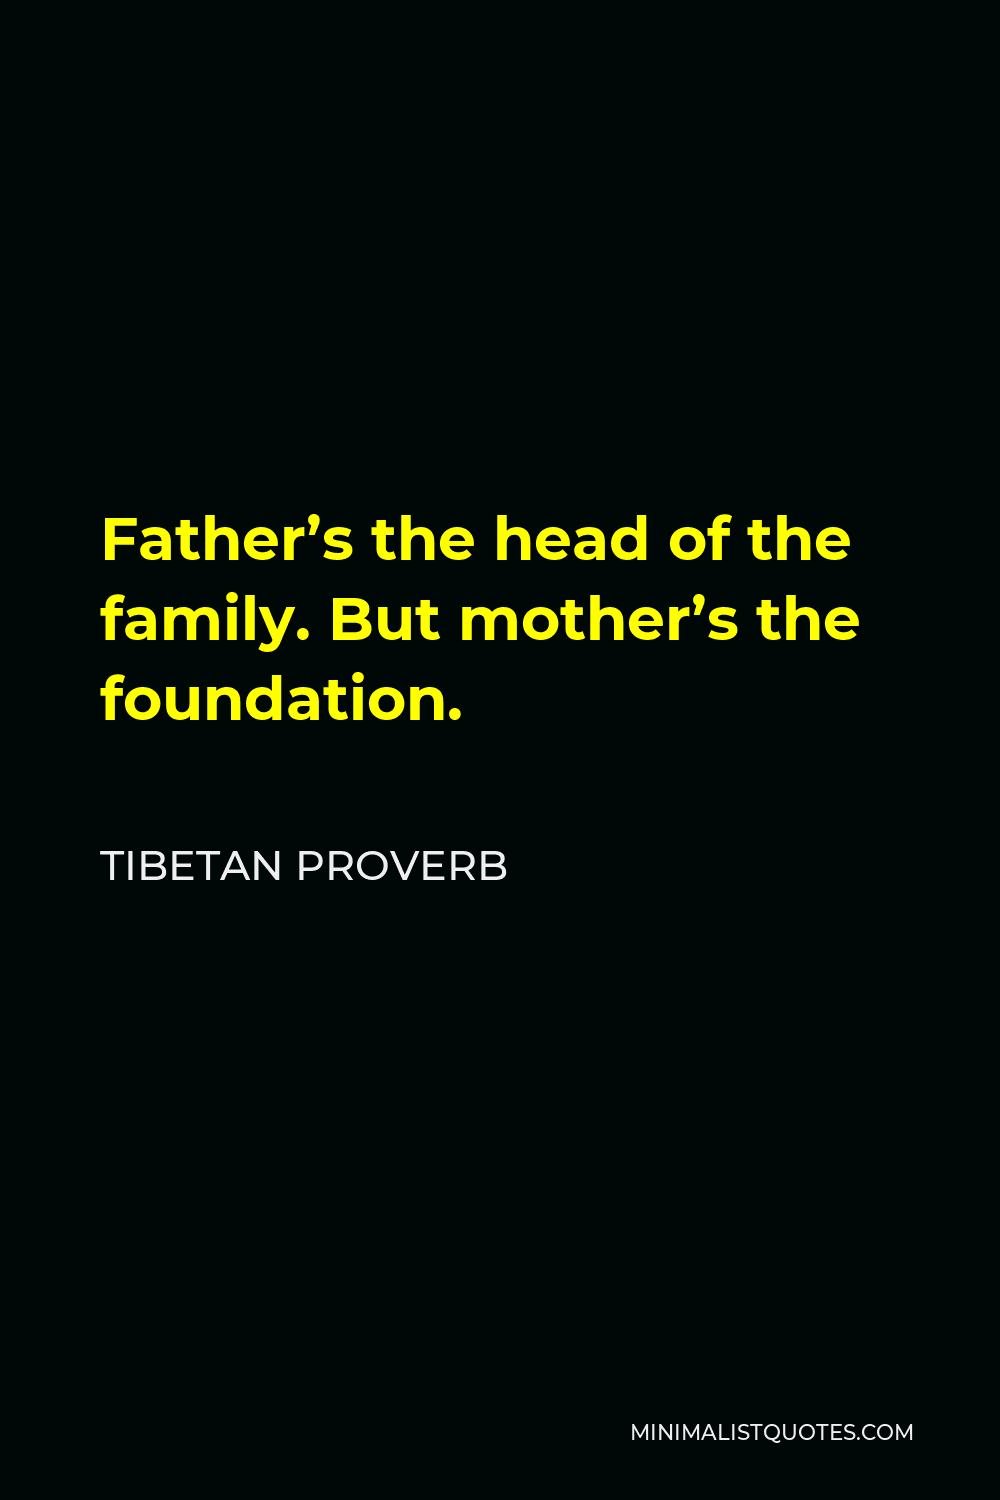 Tibetan Proverb Quote - Father’s the head of the family. But mother’s the foundation.